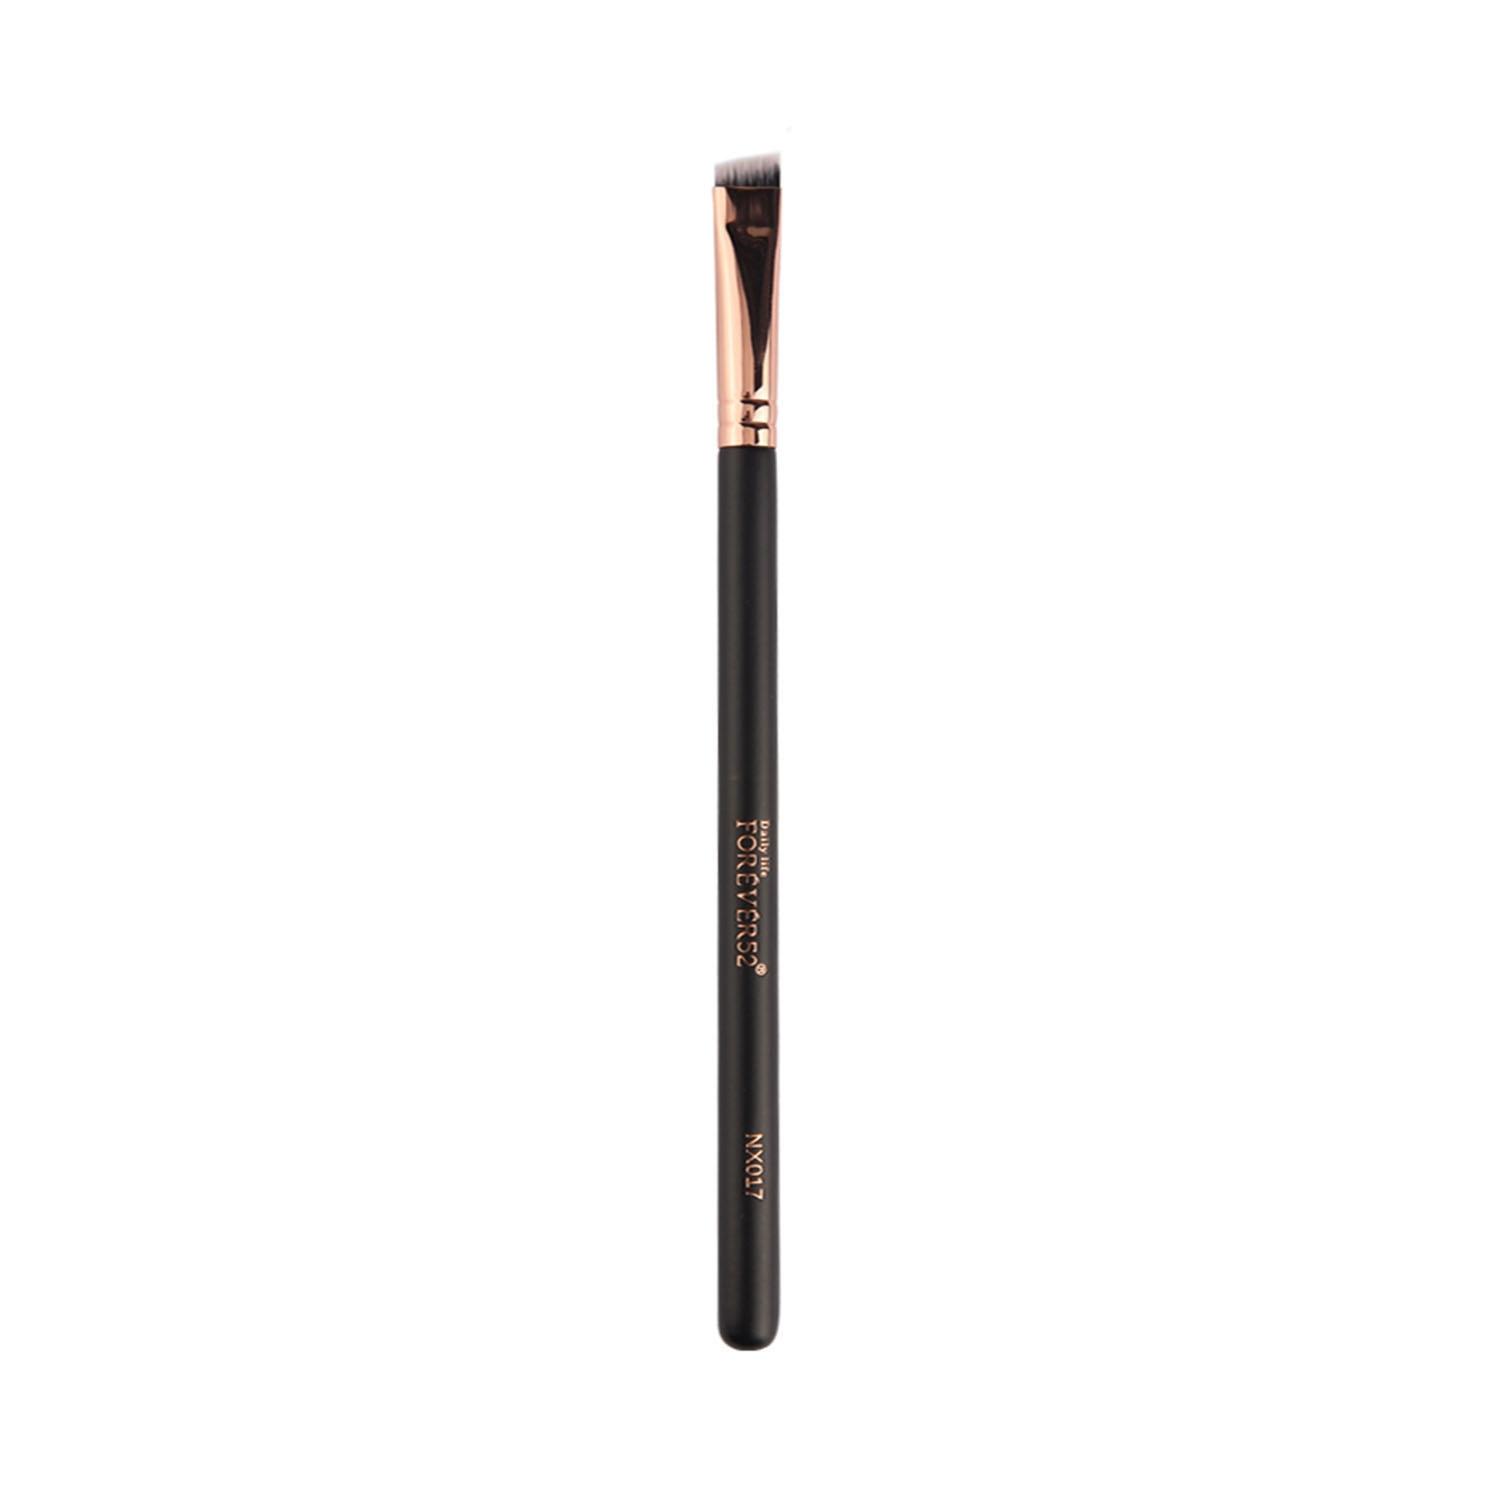 daily life forever52 eye brow brush - nx017 (1pc)